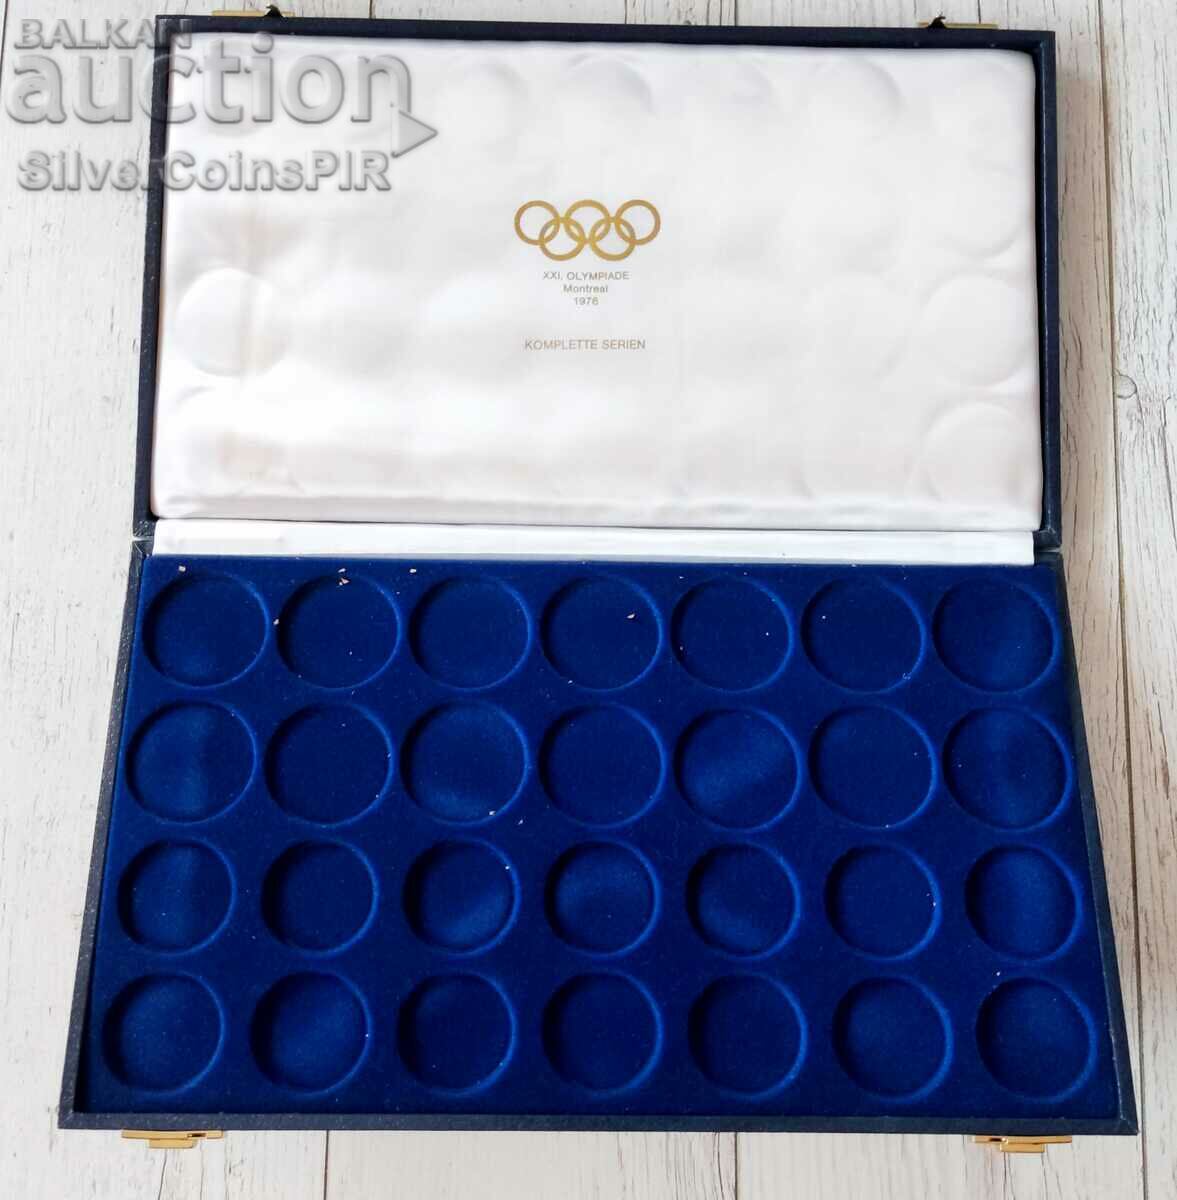 Large box for 28 pcs. Coins